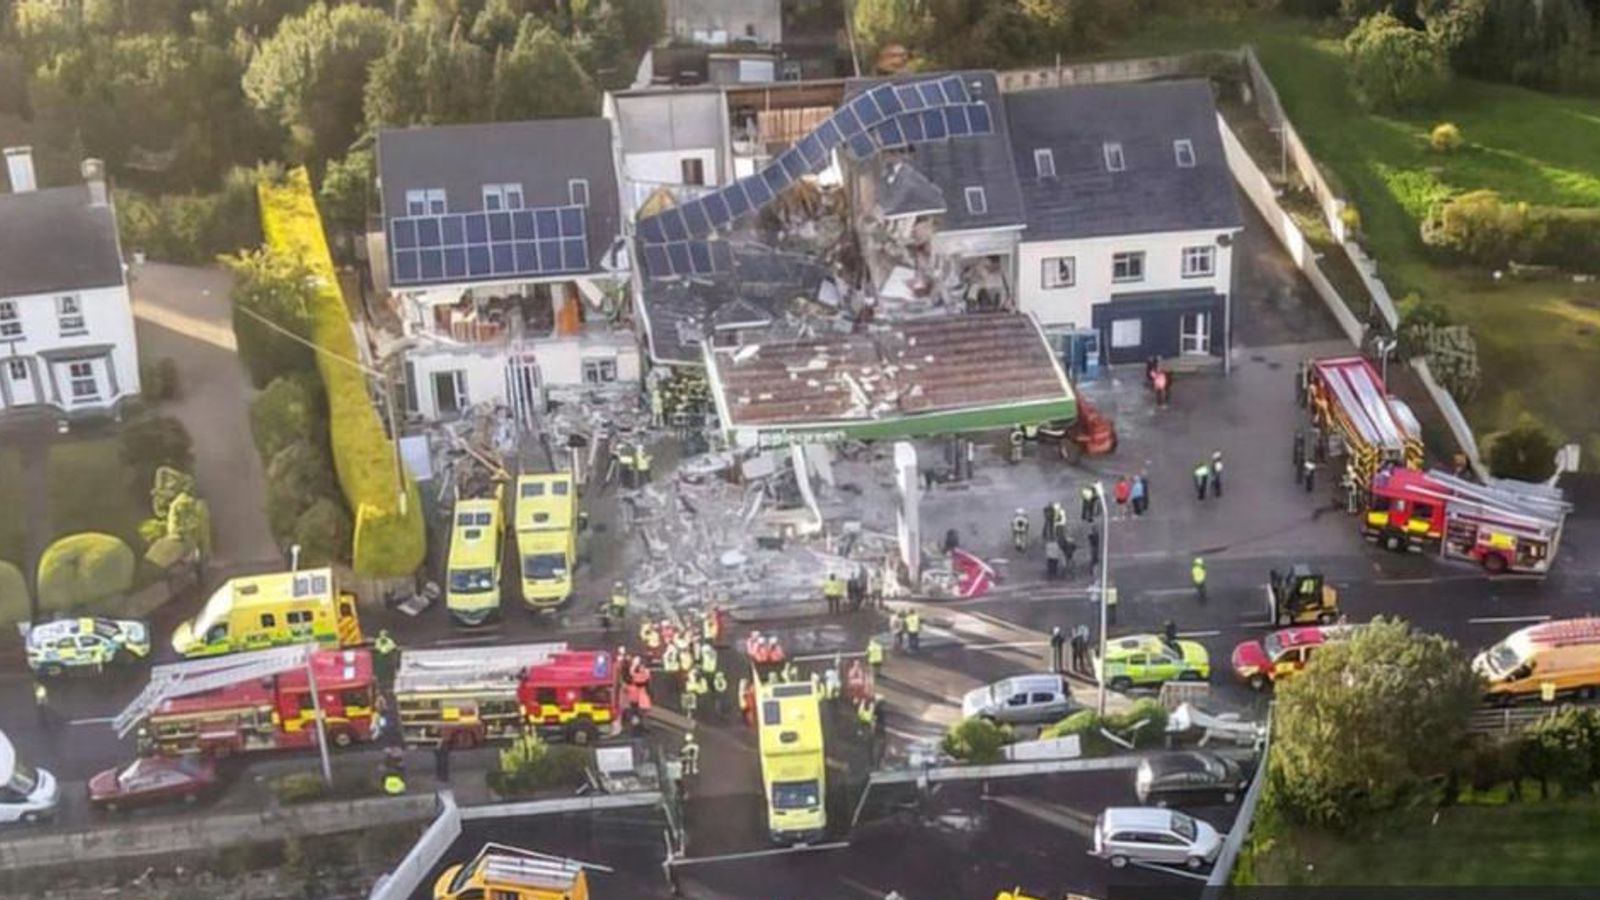 Donegal explosion: Rescuer who pulled people from debris says one man was saved by a table